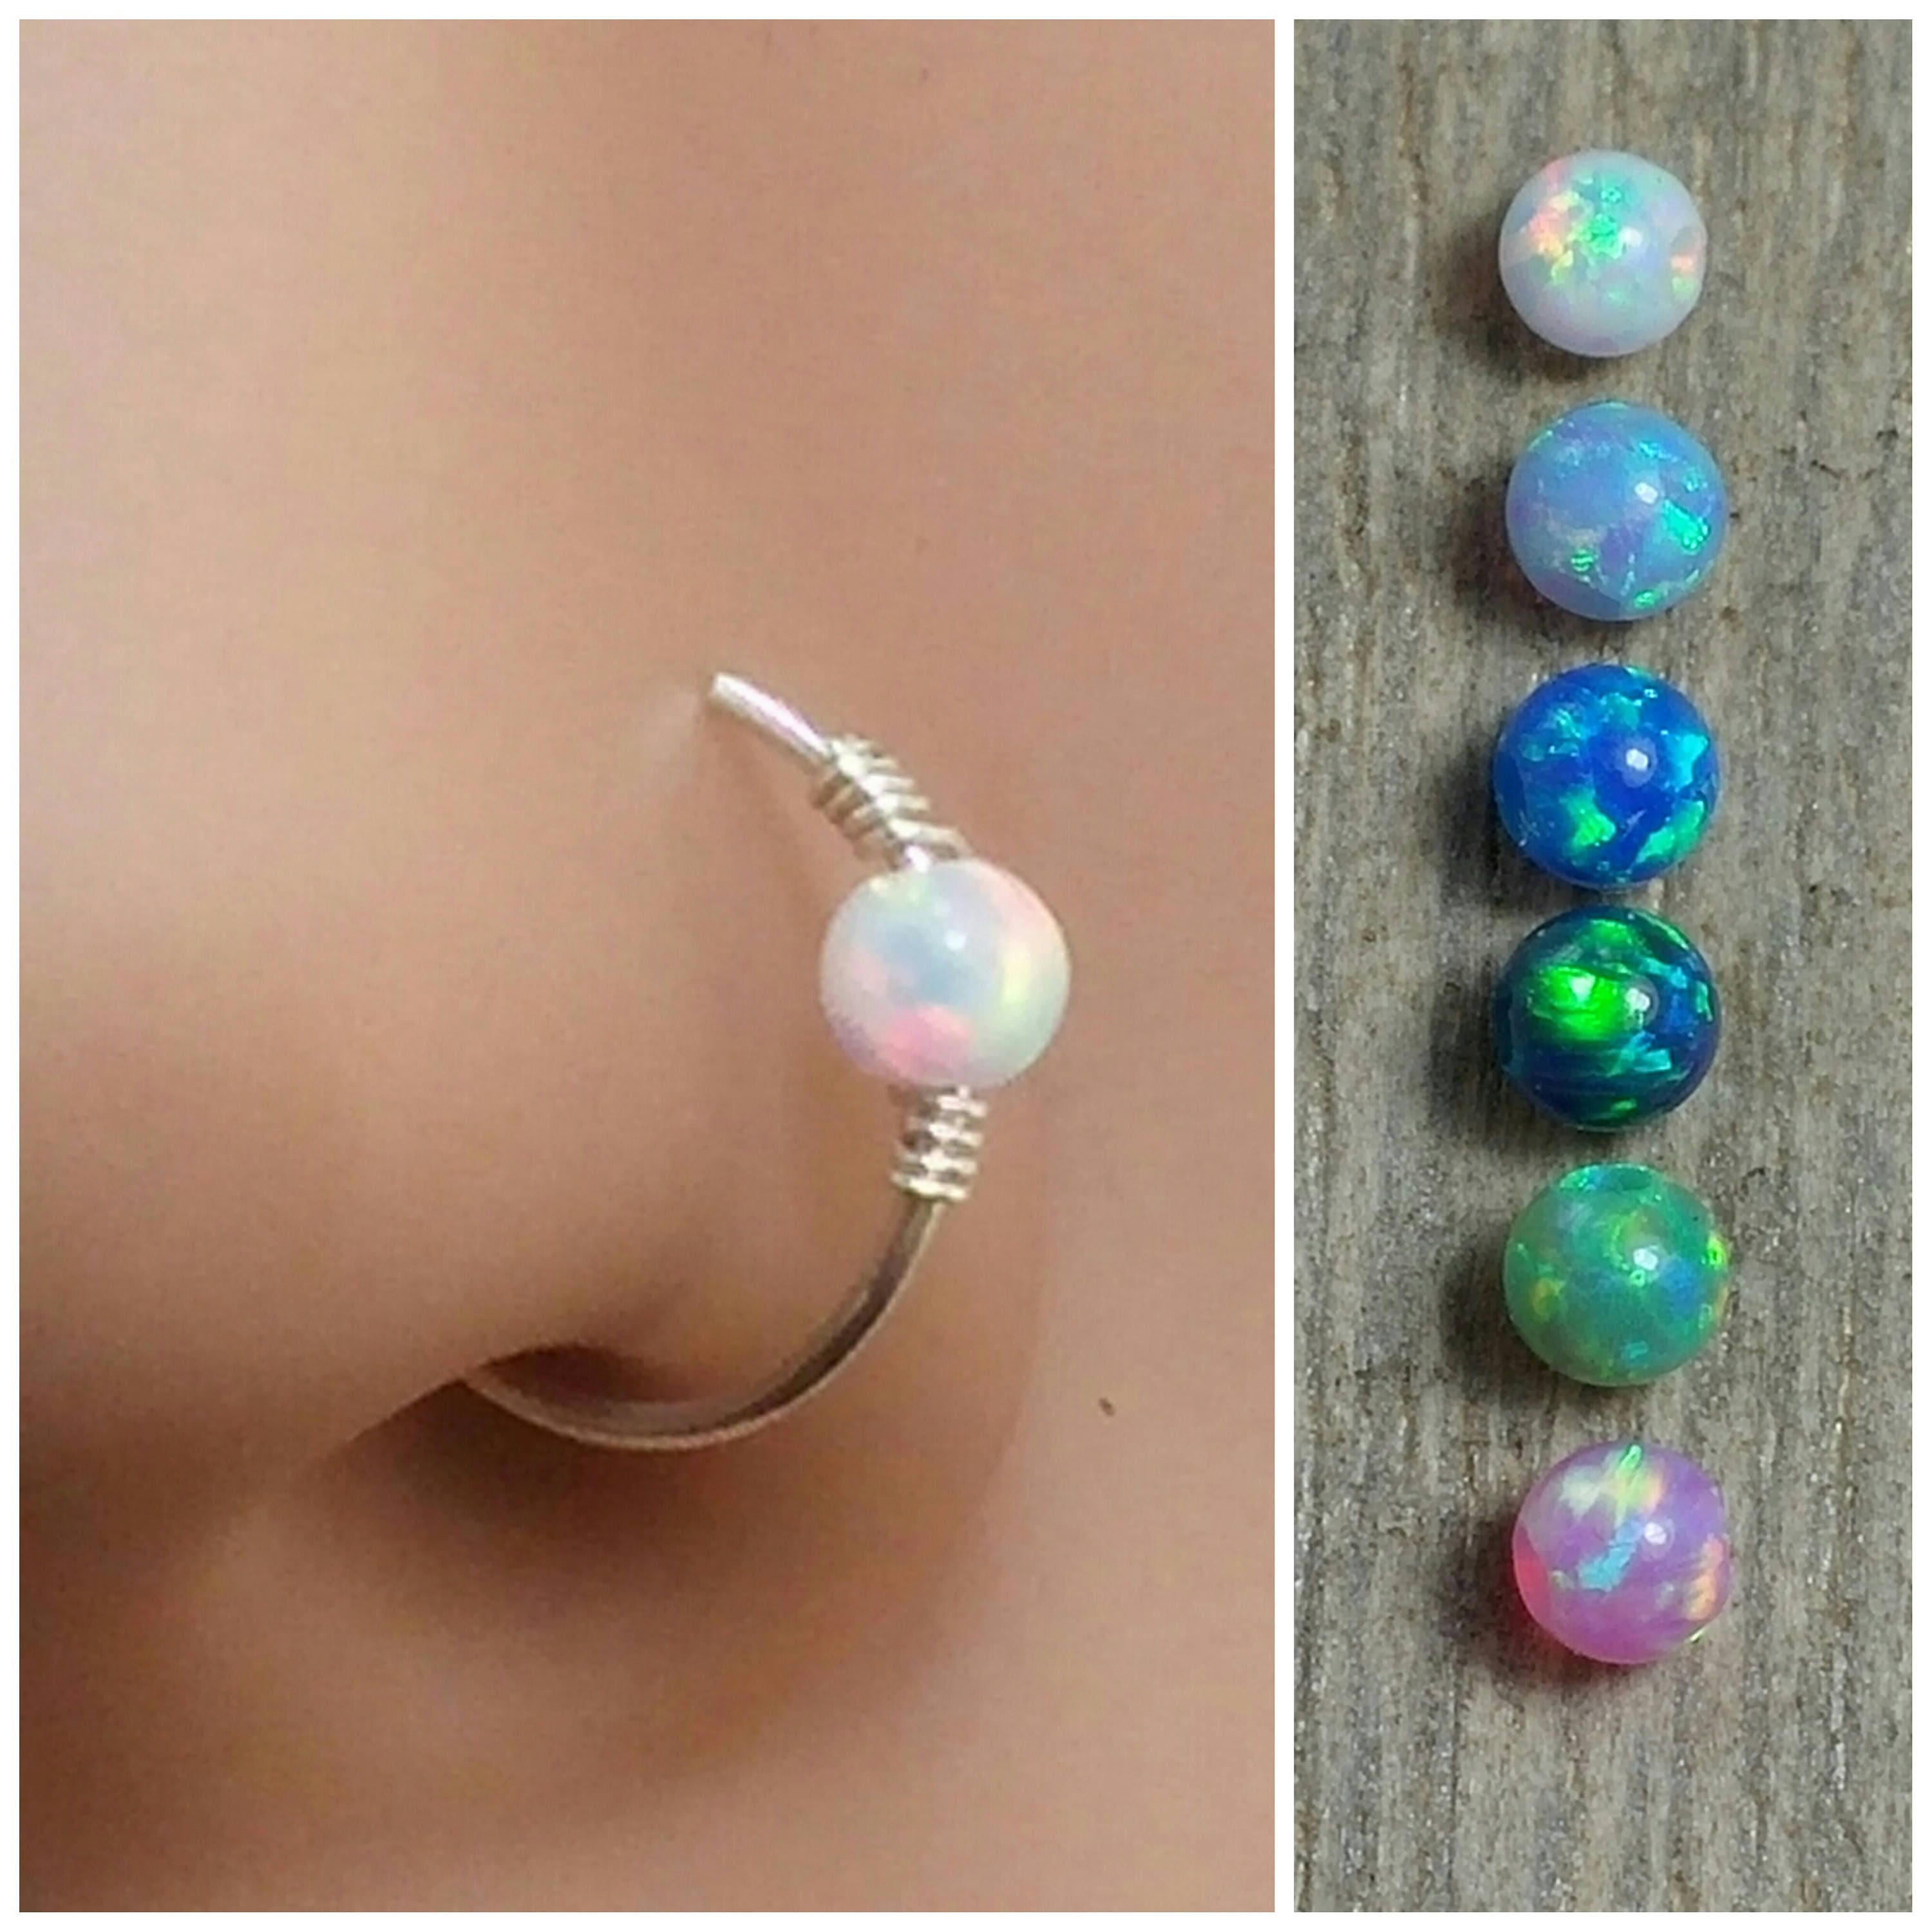 6mm Fake Nose Ring, Fake Nose Ring Cuff, Clip in Nose Ring, No Piercing  Needed 